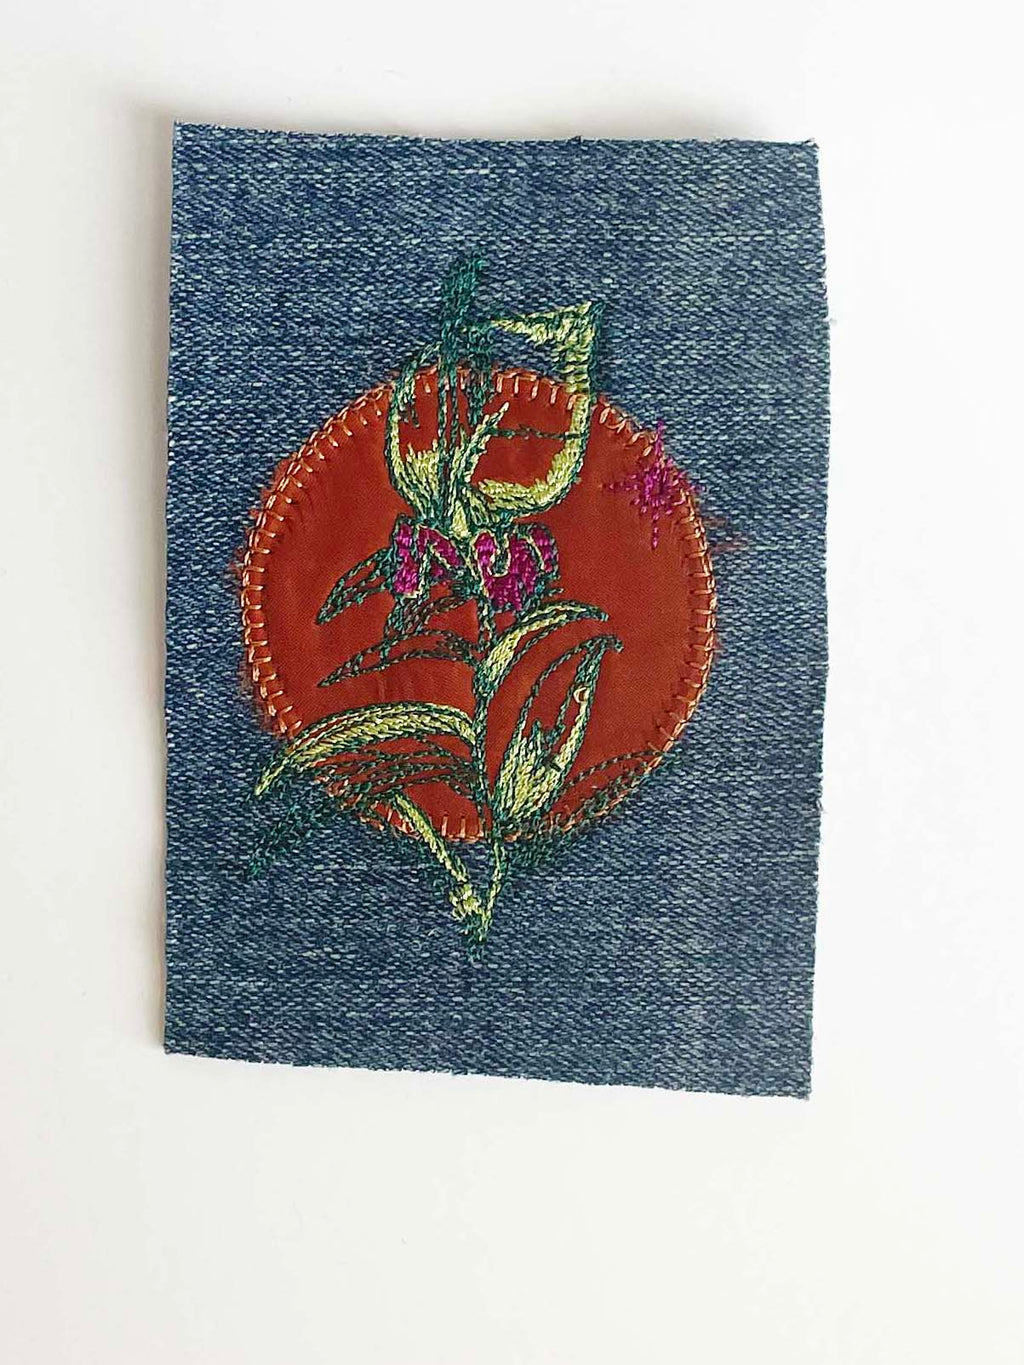 Machine embroidered bouquet of flowers in shades of magenta with neon green and dark green stem. Copper circle fabric is embroidered behind the flowers on a rectangle piece of denim. 